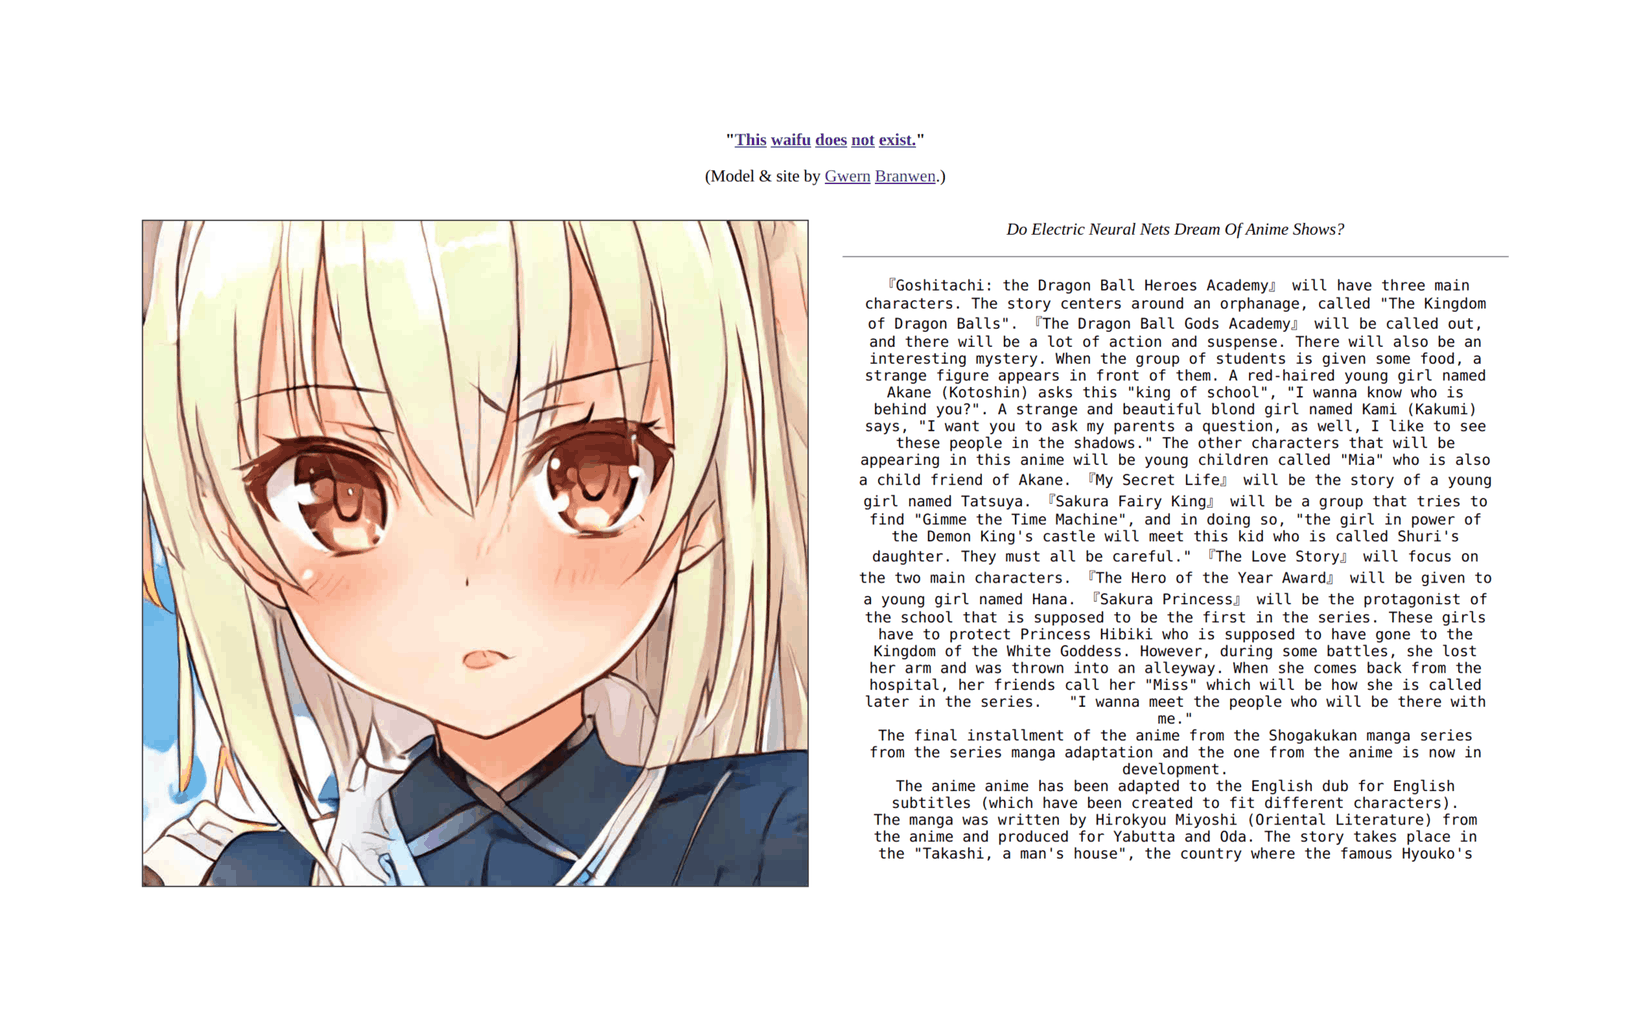 A screenshot of “This Waifu Does Not Exist” (TWDNE) showing a random StyleGAN-generated anime face and a random GPT-2-117M text sample conditioned on anime keywords/phrases.